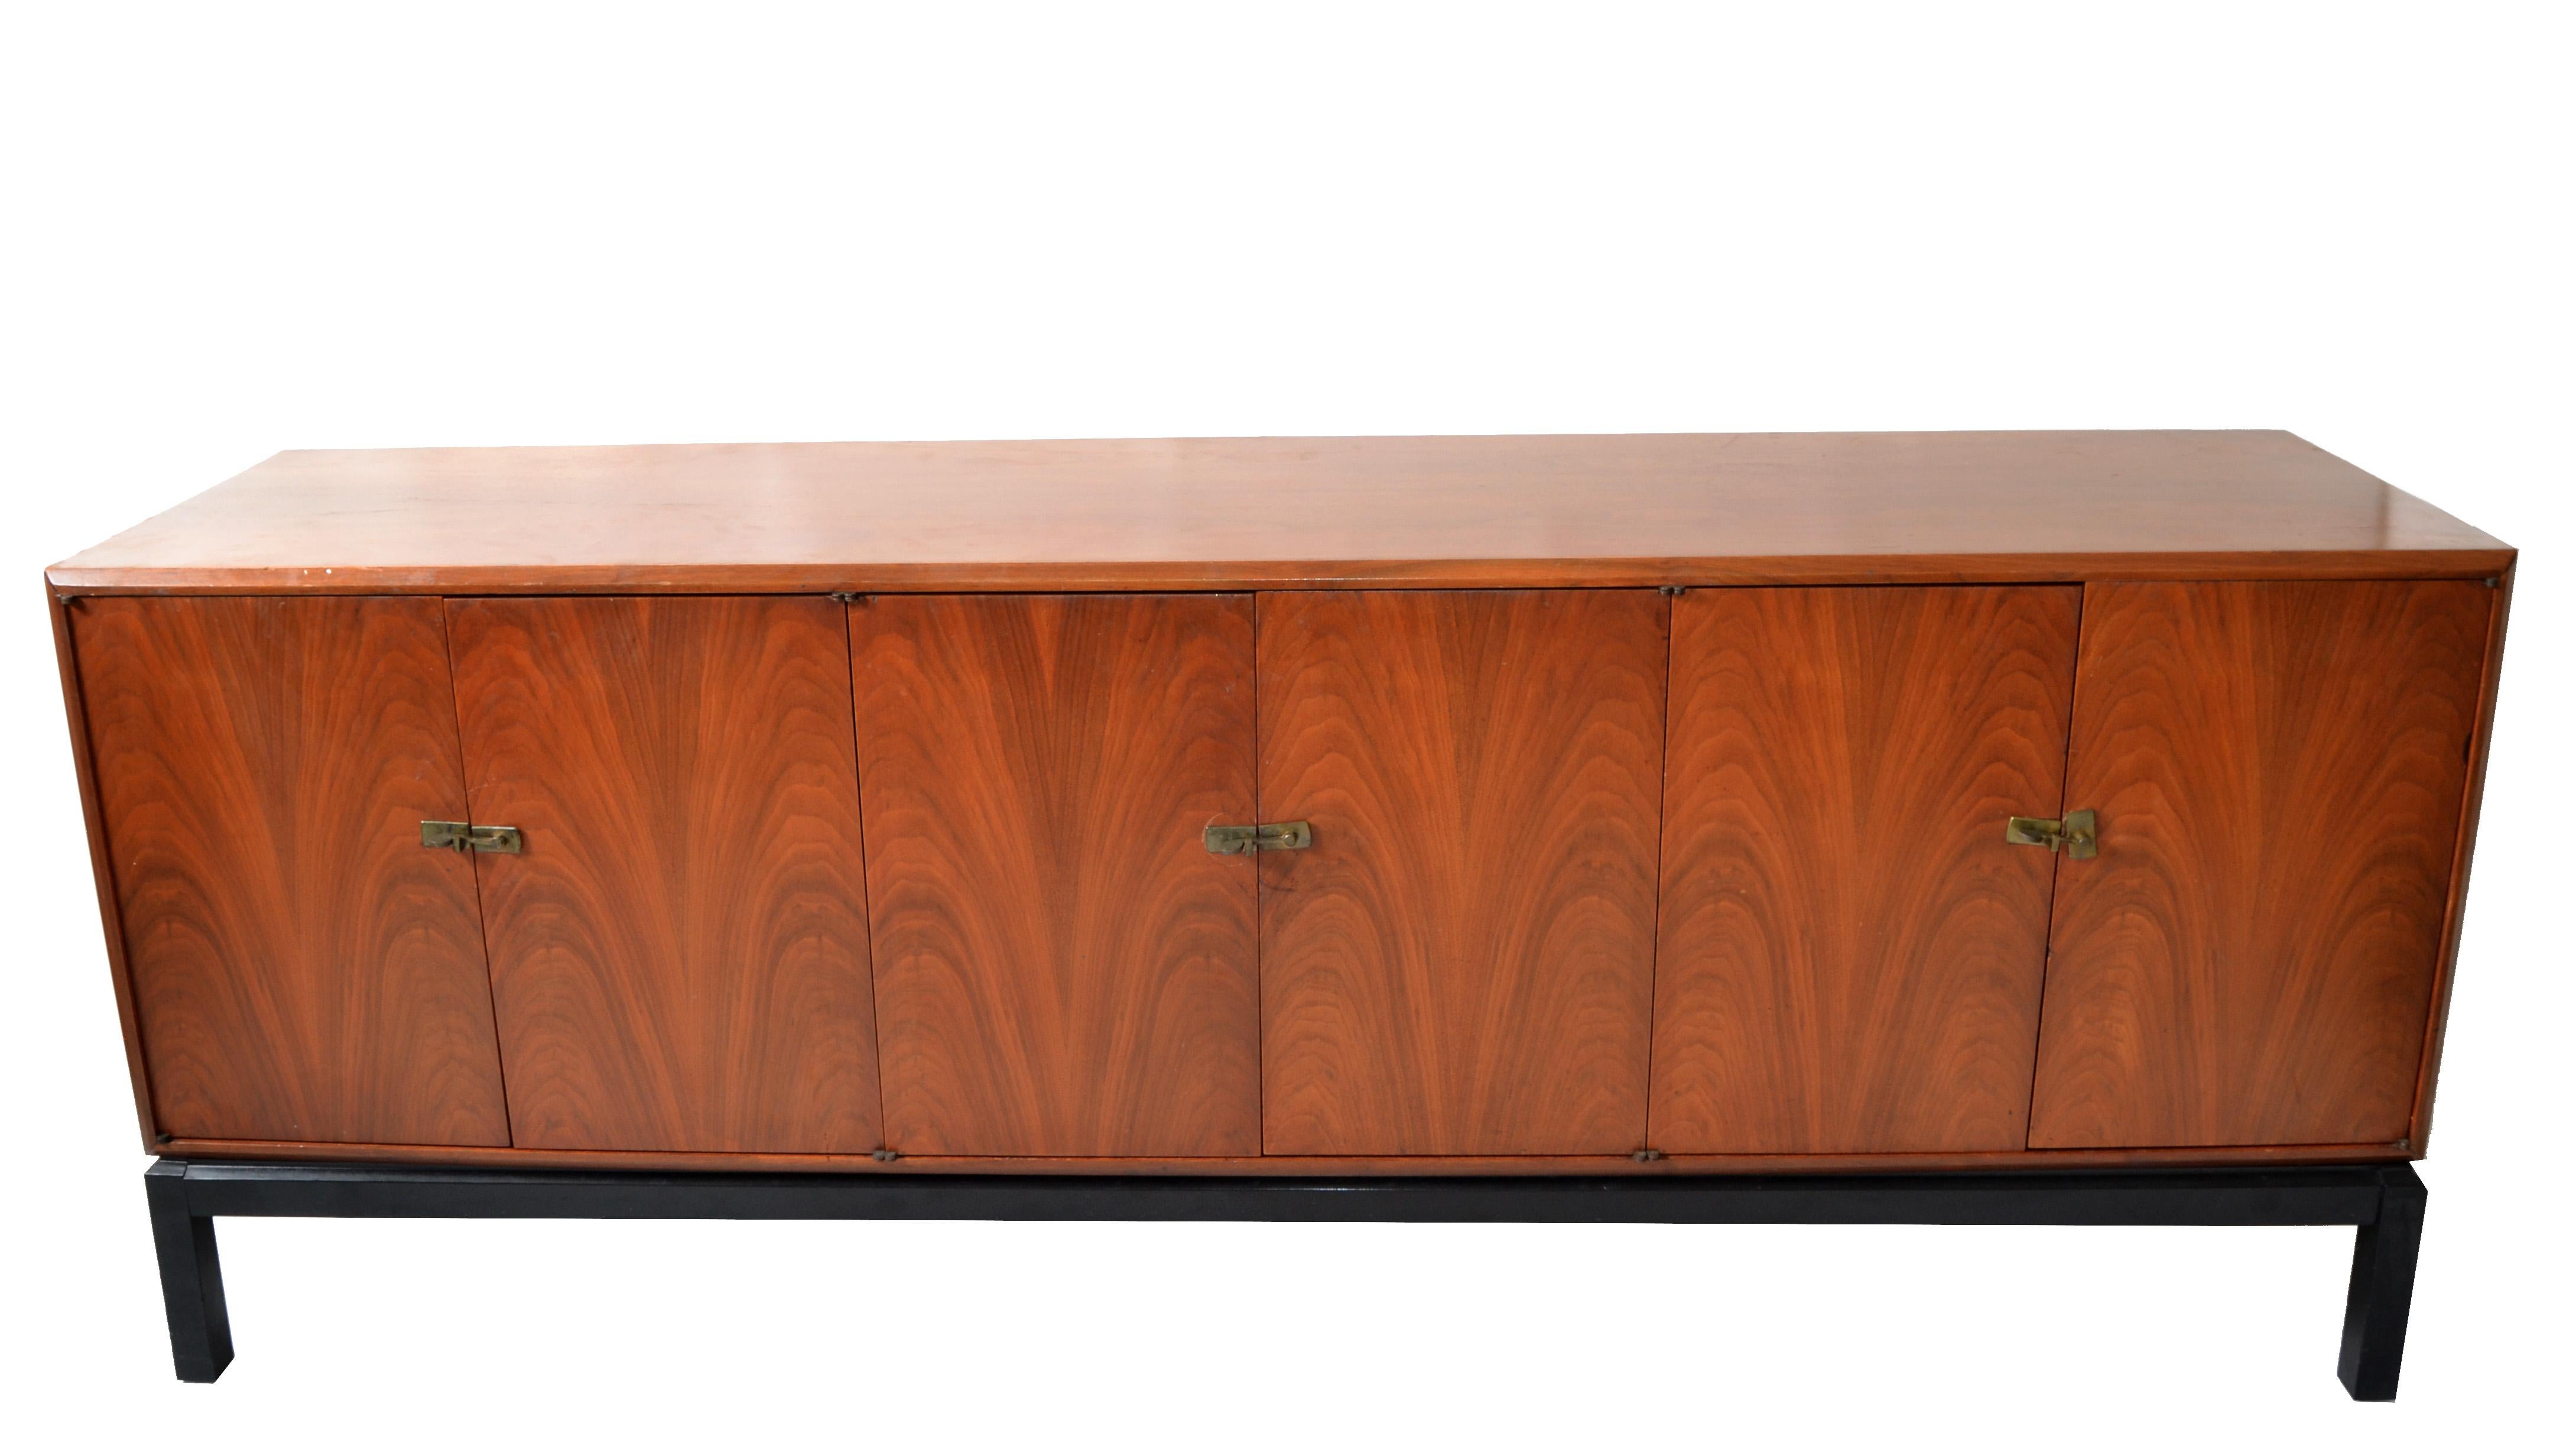 Large Mid-Century Modern Harvey Probber Style American Credenza in Walnut with Brass Hardware made in the 1960.
Features one door on the left with one shelf, the middle with 3 drawers, and the right side with 2 shelves.
The Base Frame with the four